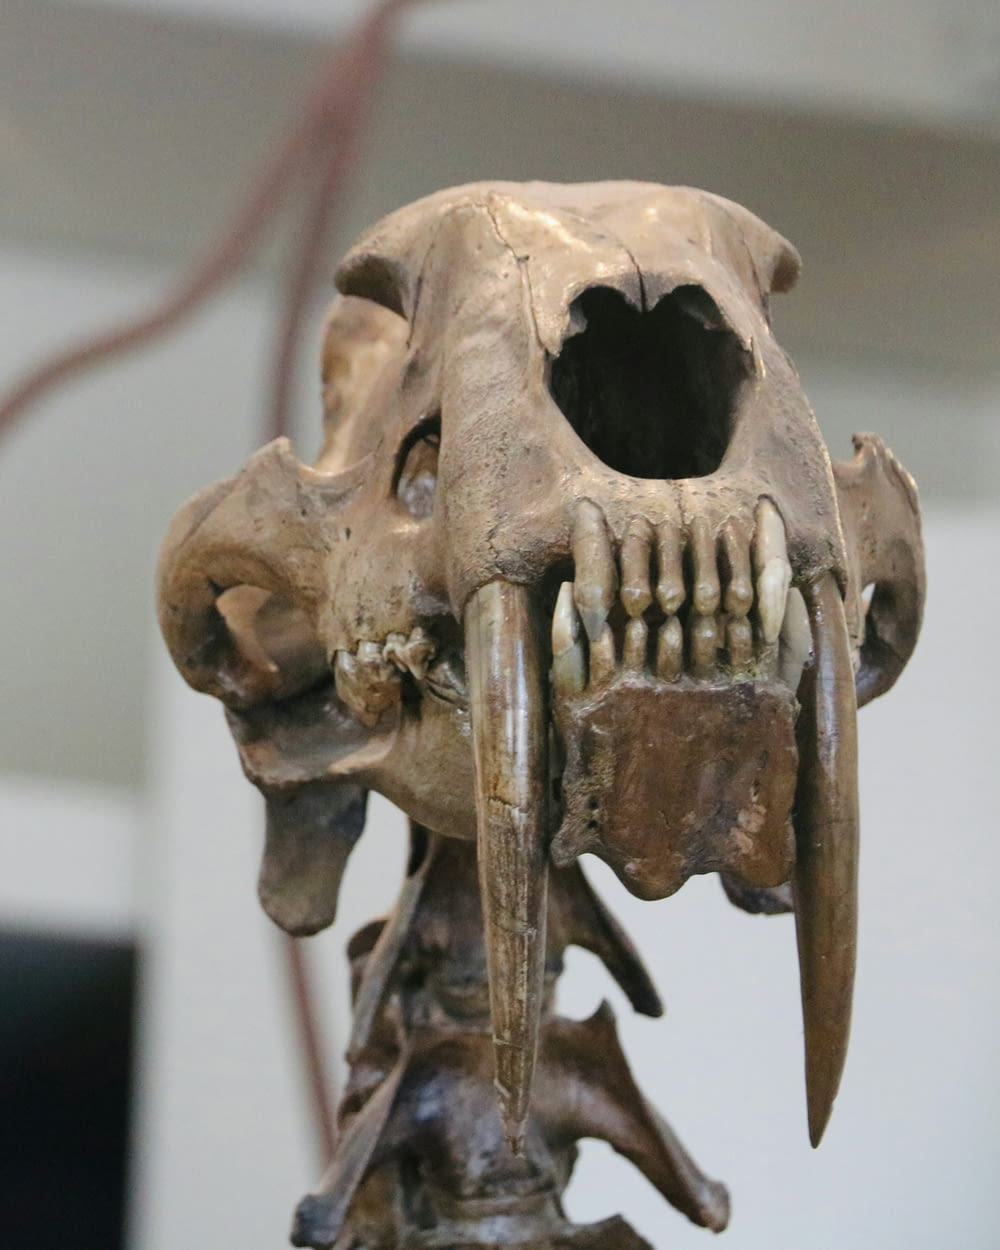 a close up of a human skull with a long beak